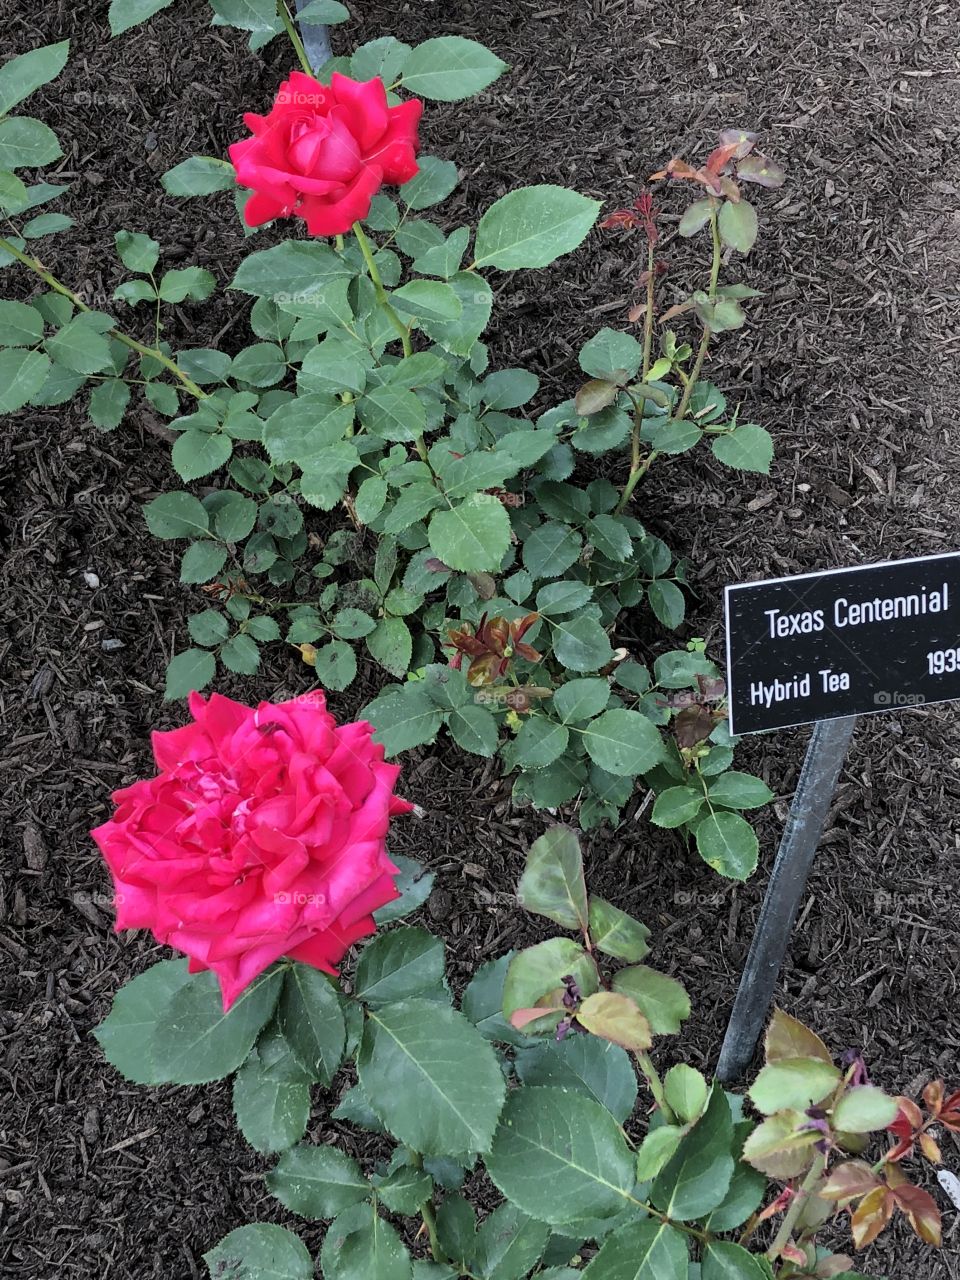 A beautiful set of Texas Centennial roses taken from the rose garden in Colonial Park in Somerset, NJ. 